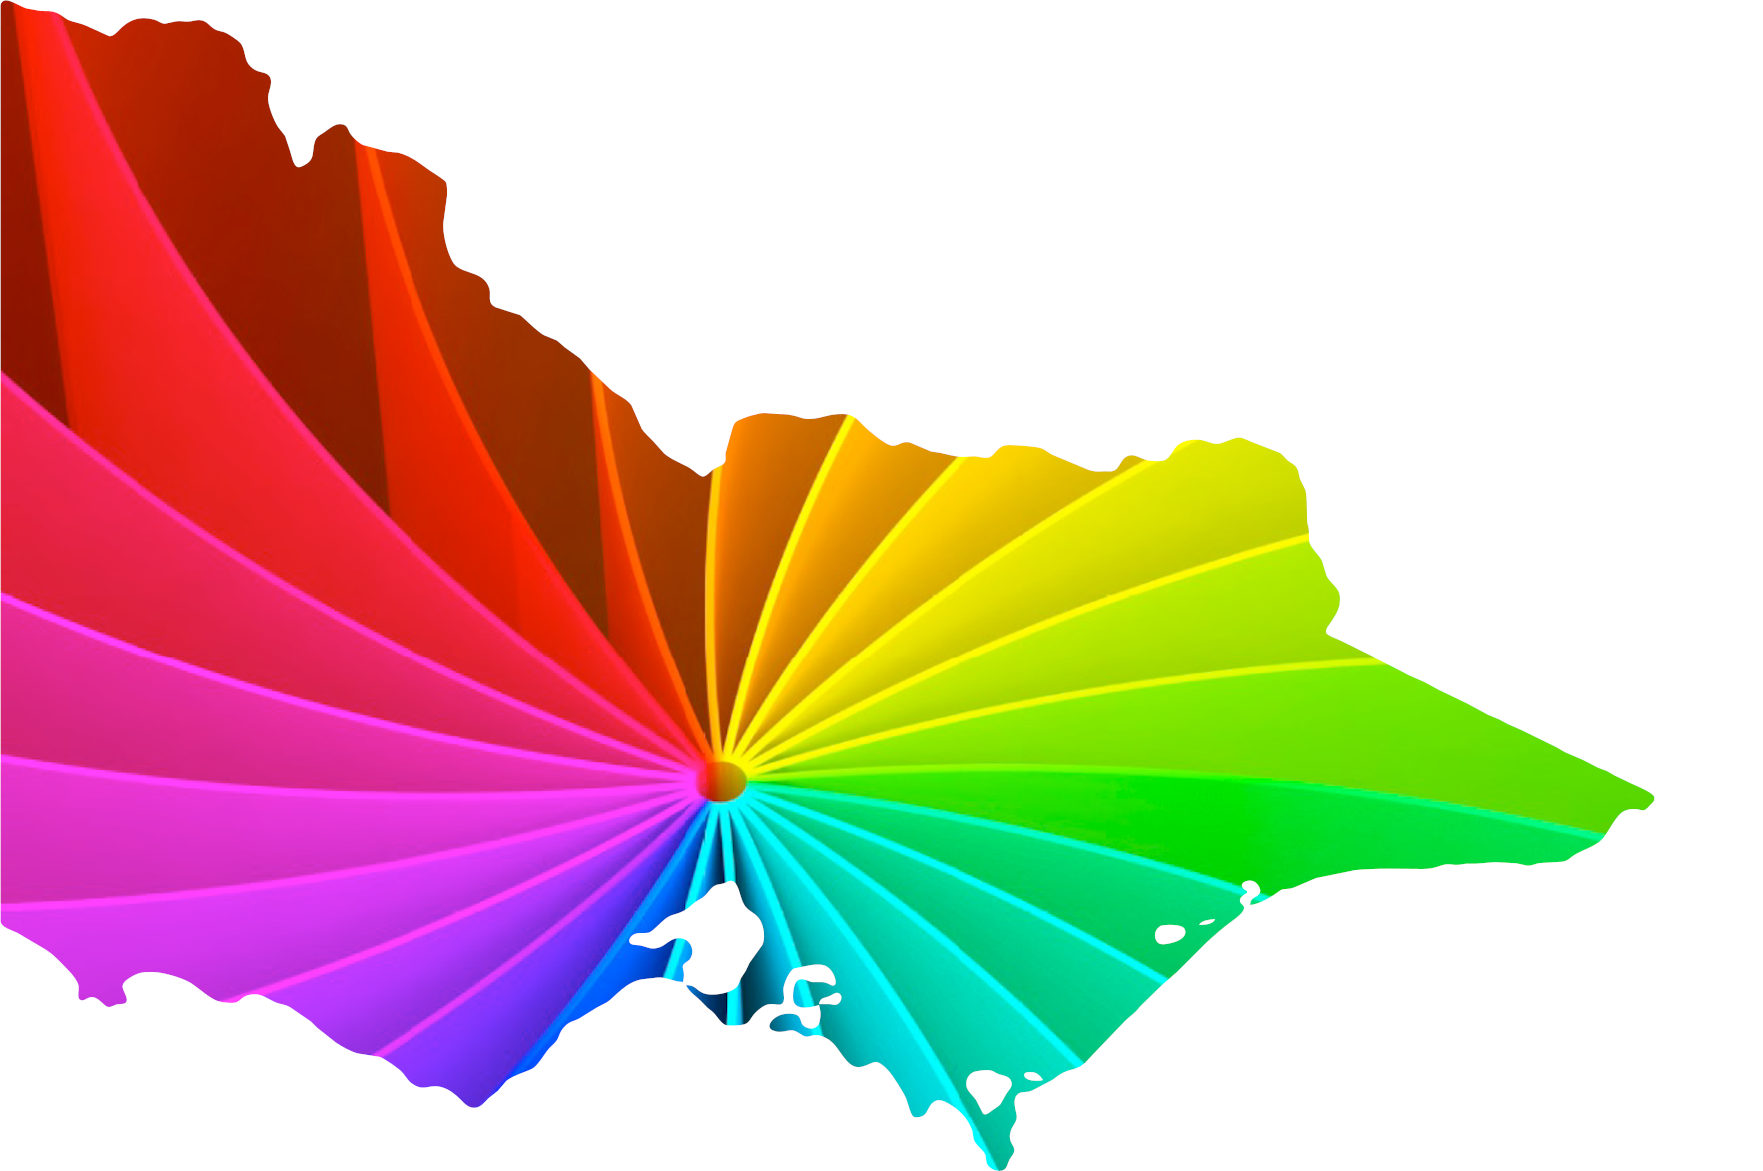 Design of rainbow swirled pages, cut out in the shape of the state of Victoria